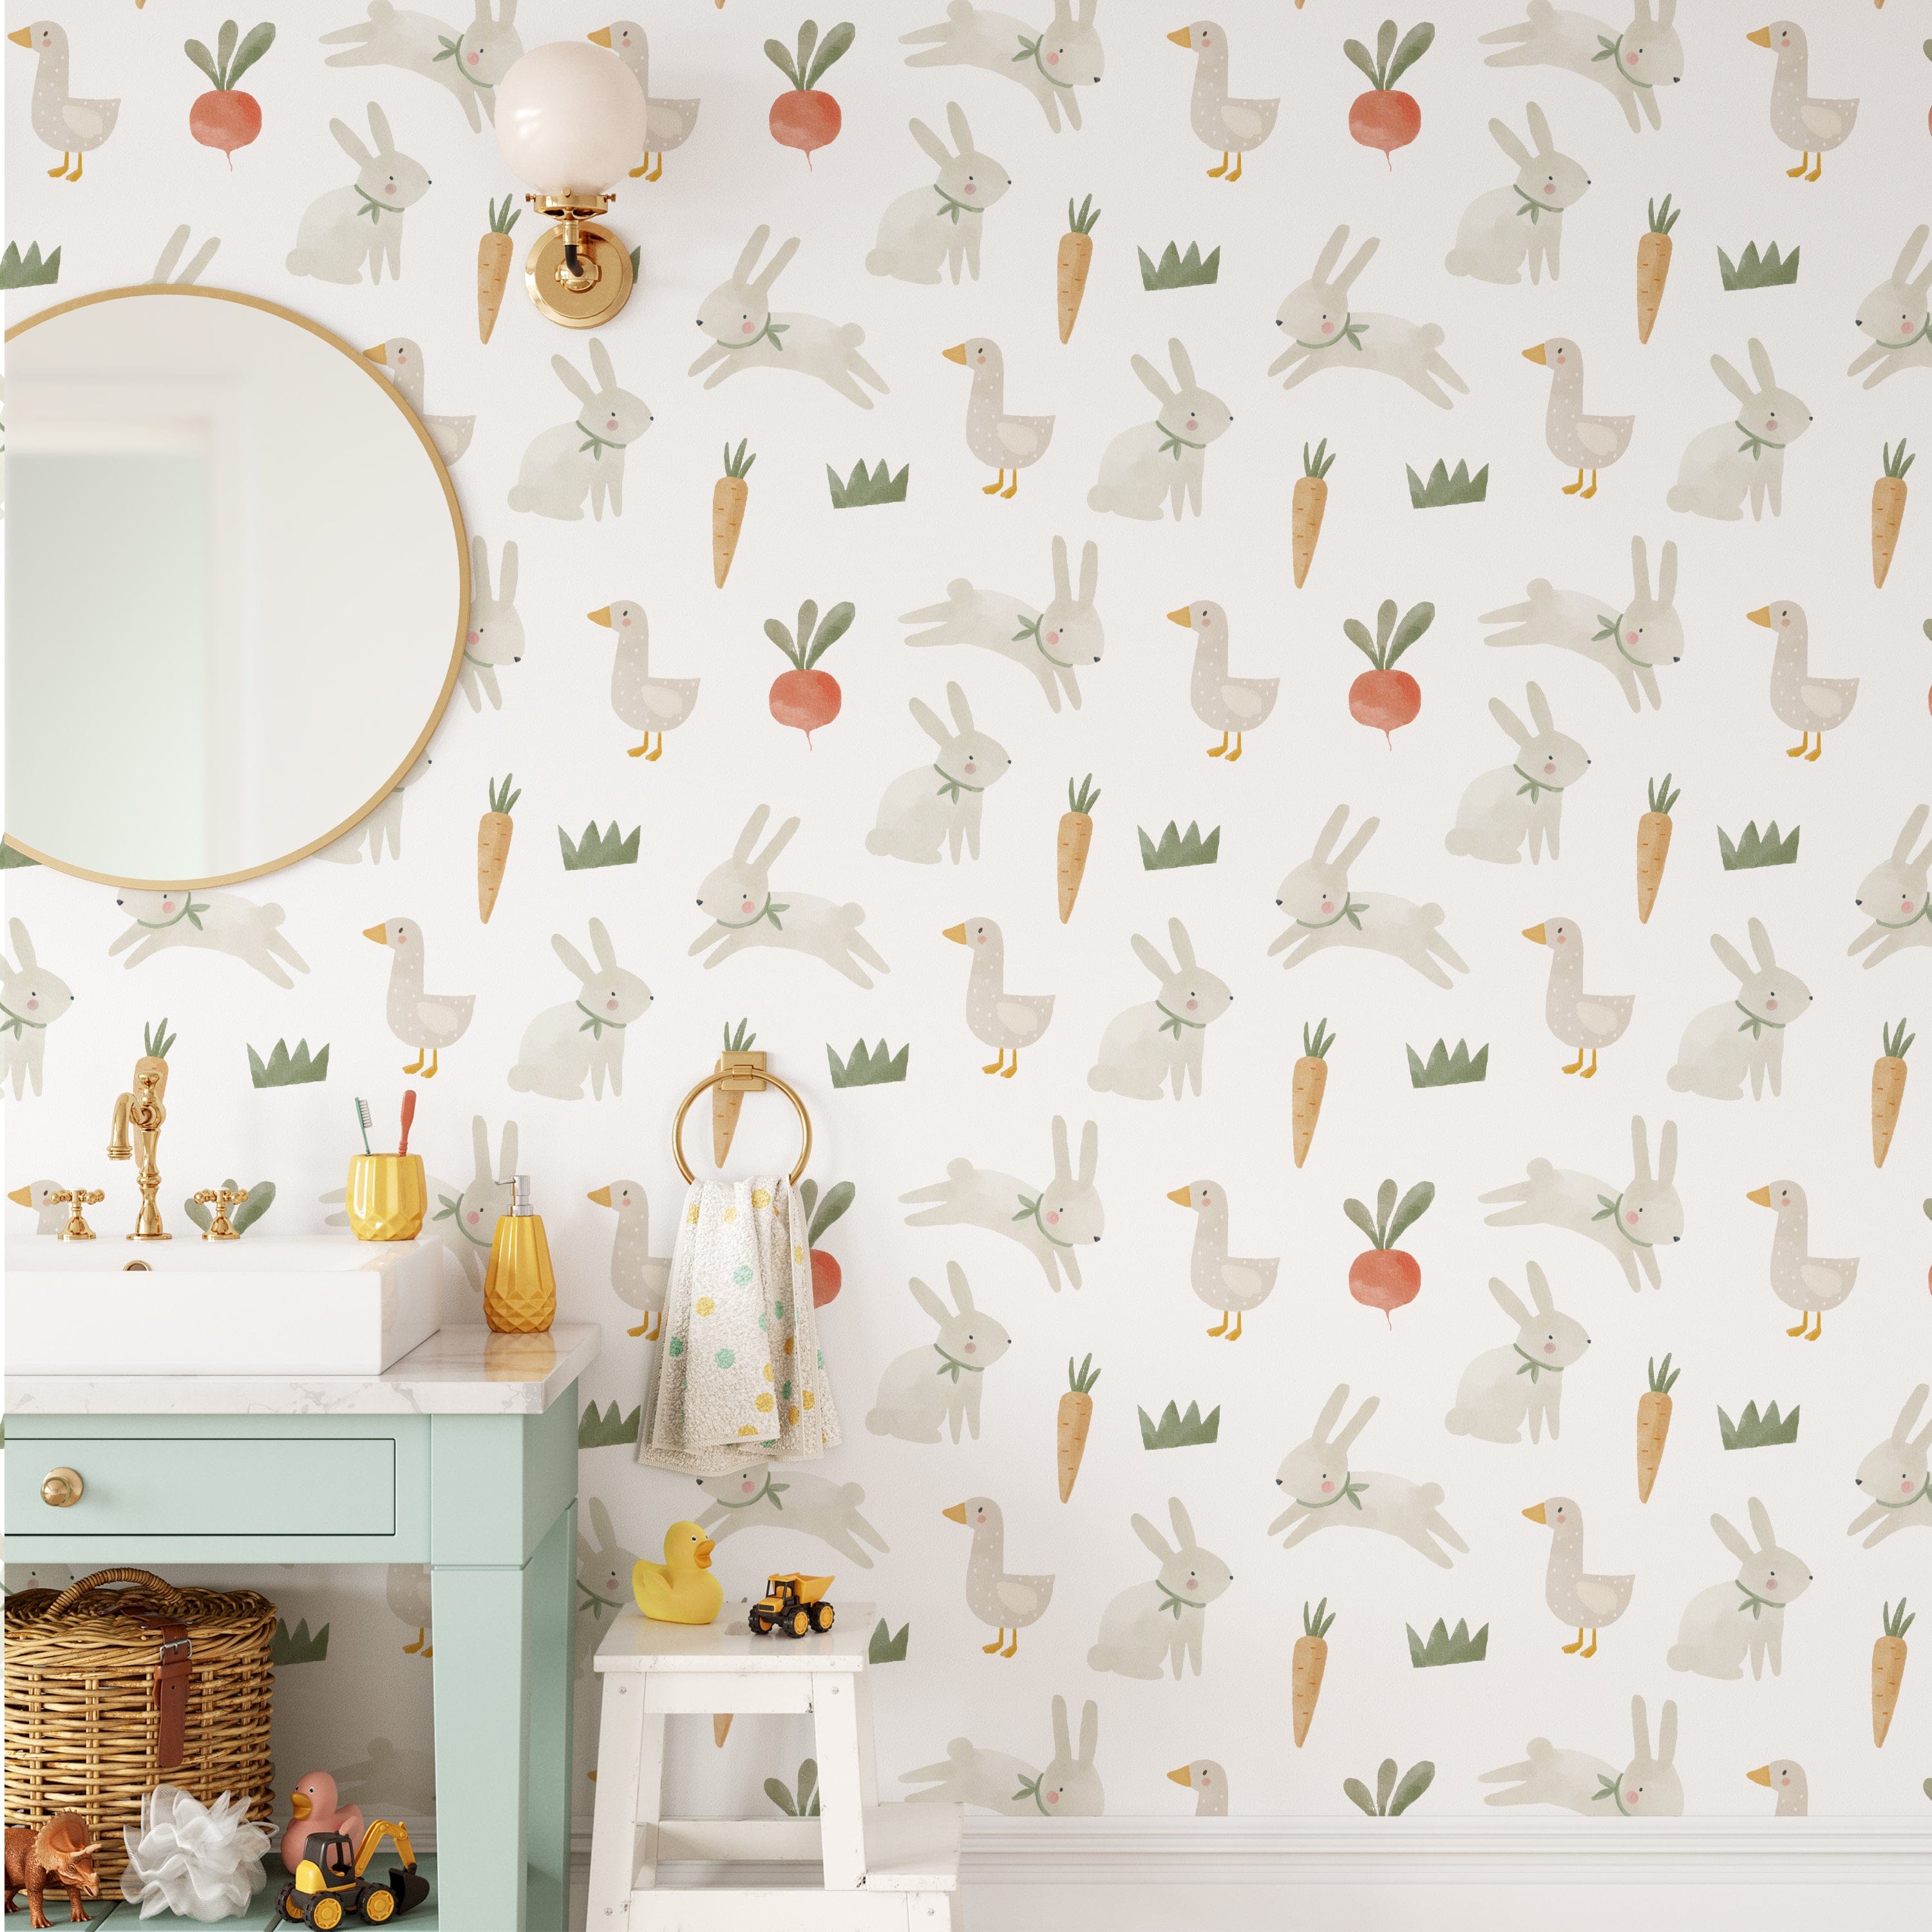 A children's bathroom decorated with Farm Friend Wallpaper - Happy Bunnies, featuring playful hand-drawn illustrations of bunnies, geese, carrots, radishes, and grass on a white background.